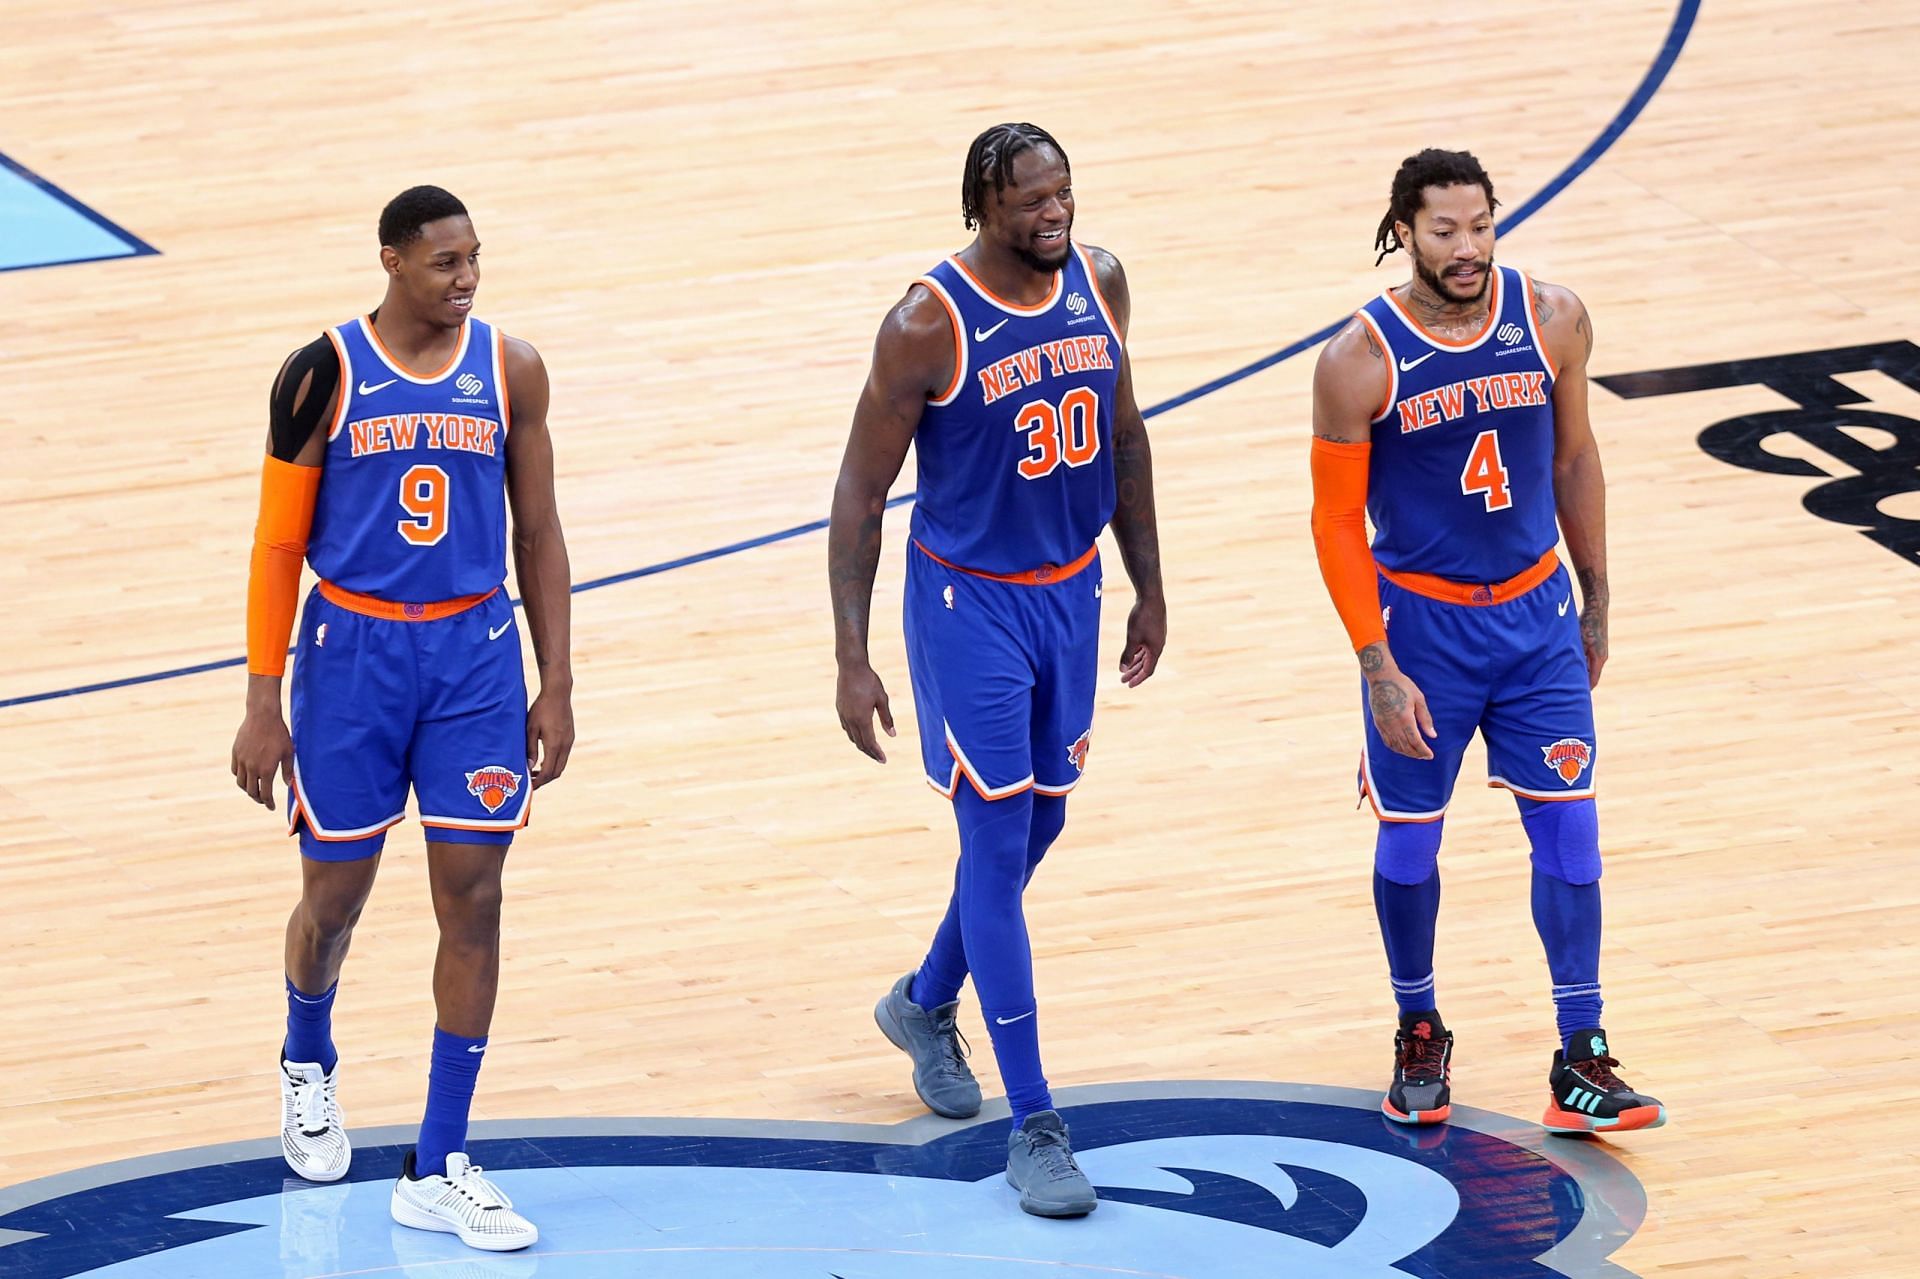 The New York Knicks are on a slippery slope if they continue to play with lack of effort and hustle [Photo: Daily Knicks]